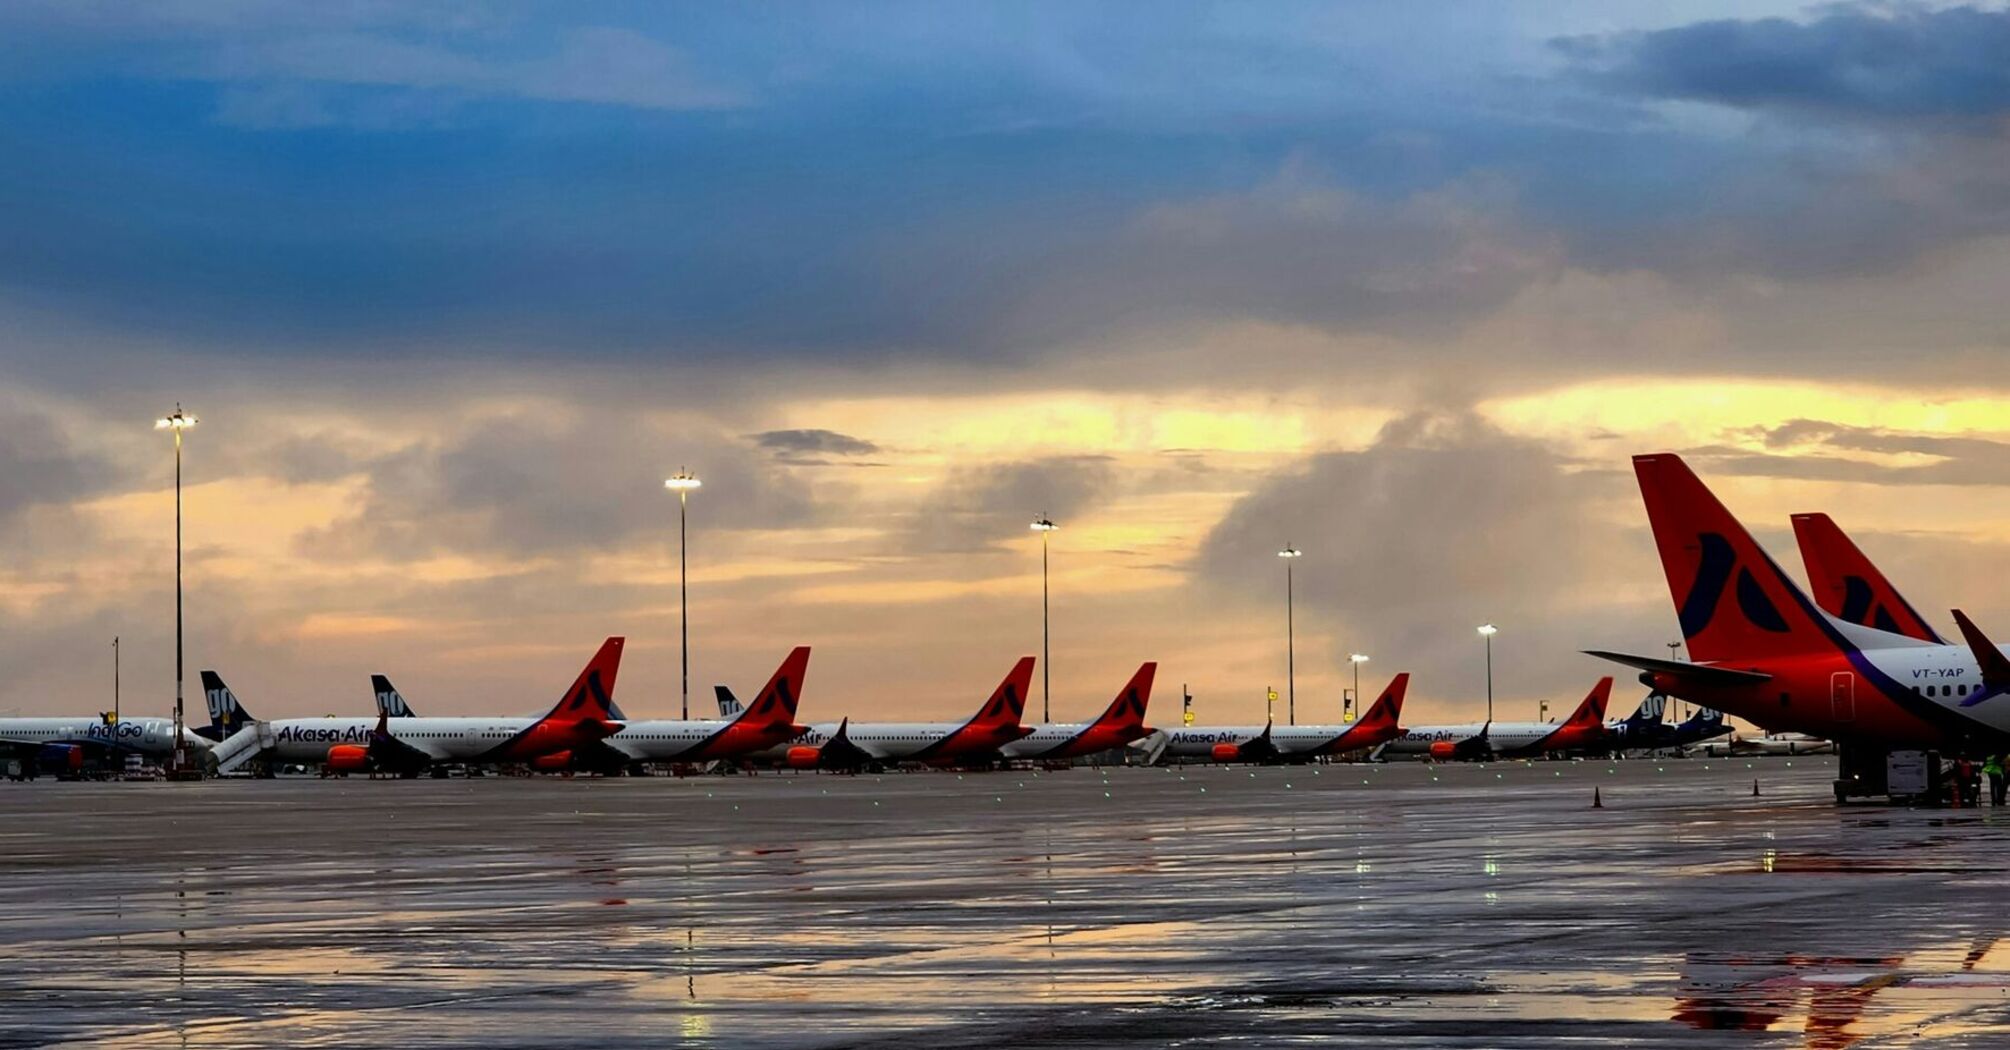 Row of Akasa Air airplanes on a wet tarmac at dusk, with lit lampposts and a dramatic cloudy sky in the background